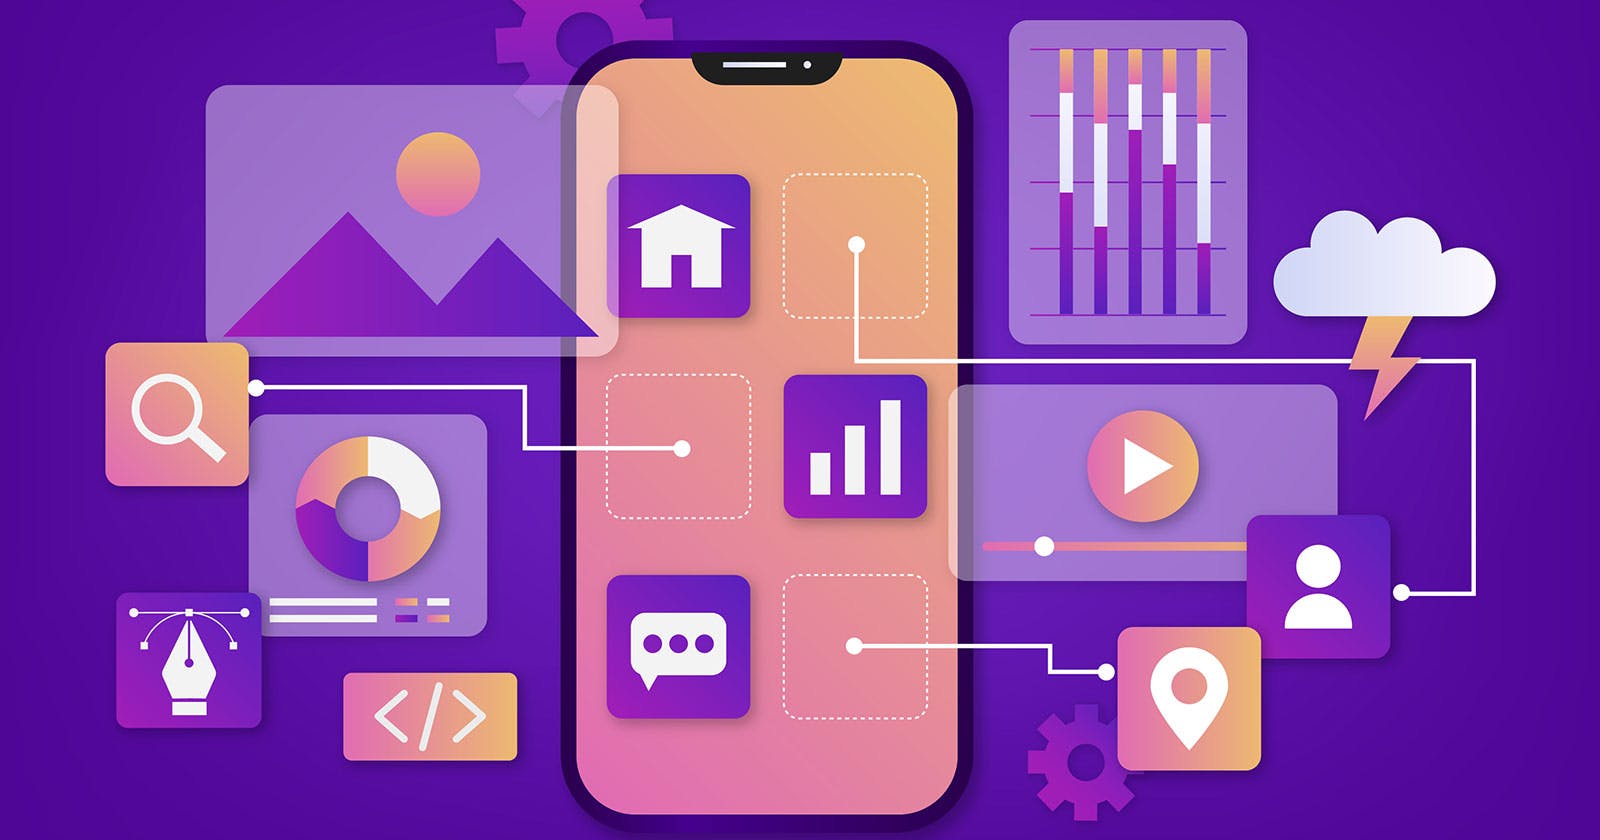 App Development Trends for 2023: Overview and Challenges